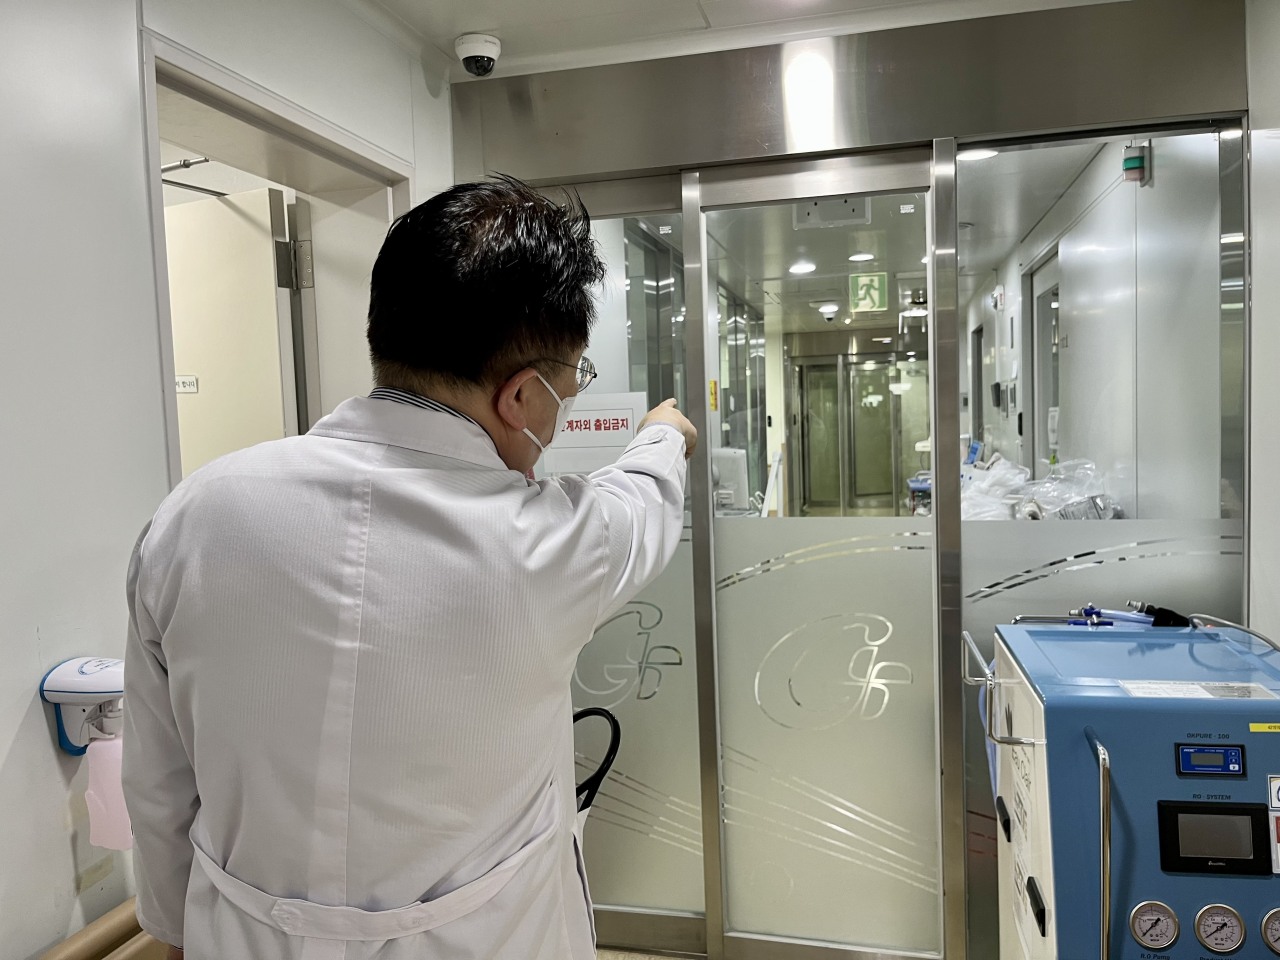 The glass screens operate on an interlock control system that is used to seal off areas with infection risks. The isolation unit is accessible via separate entrance and elevators to shield the rest of the hospital from a possible exposure. (Kim Arin/The Korea Herald)